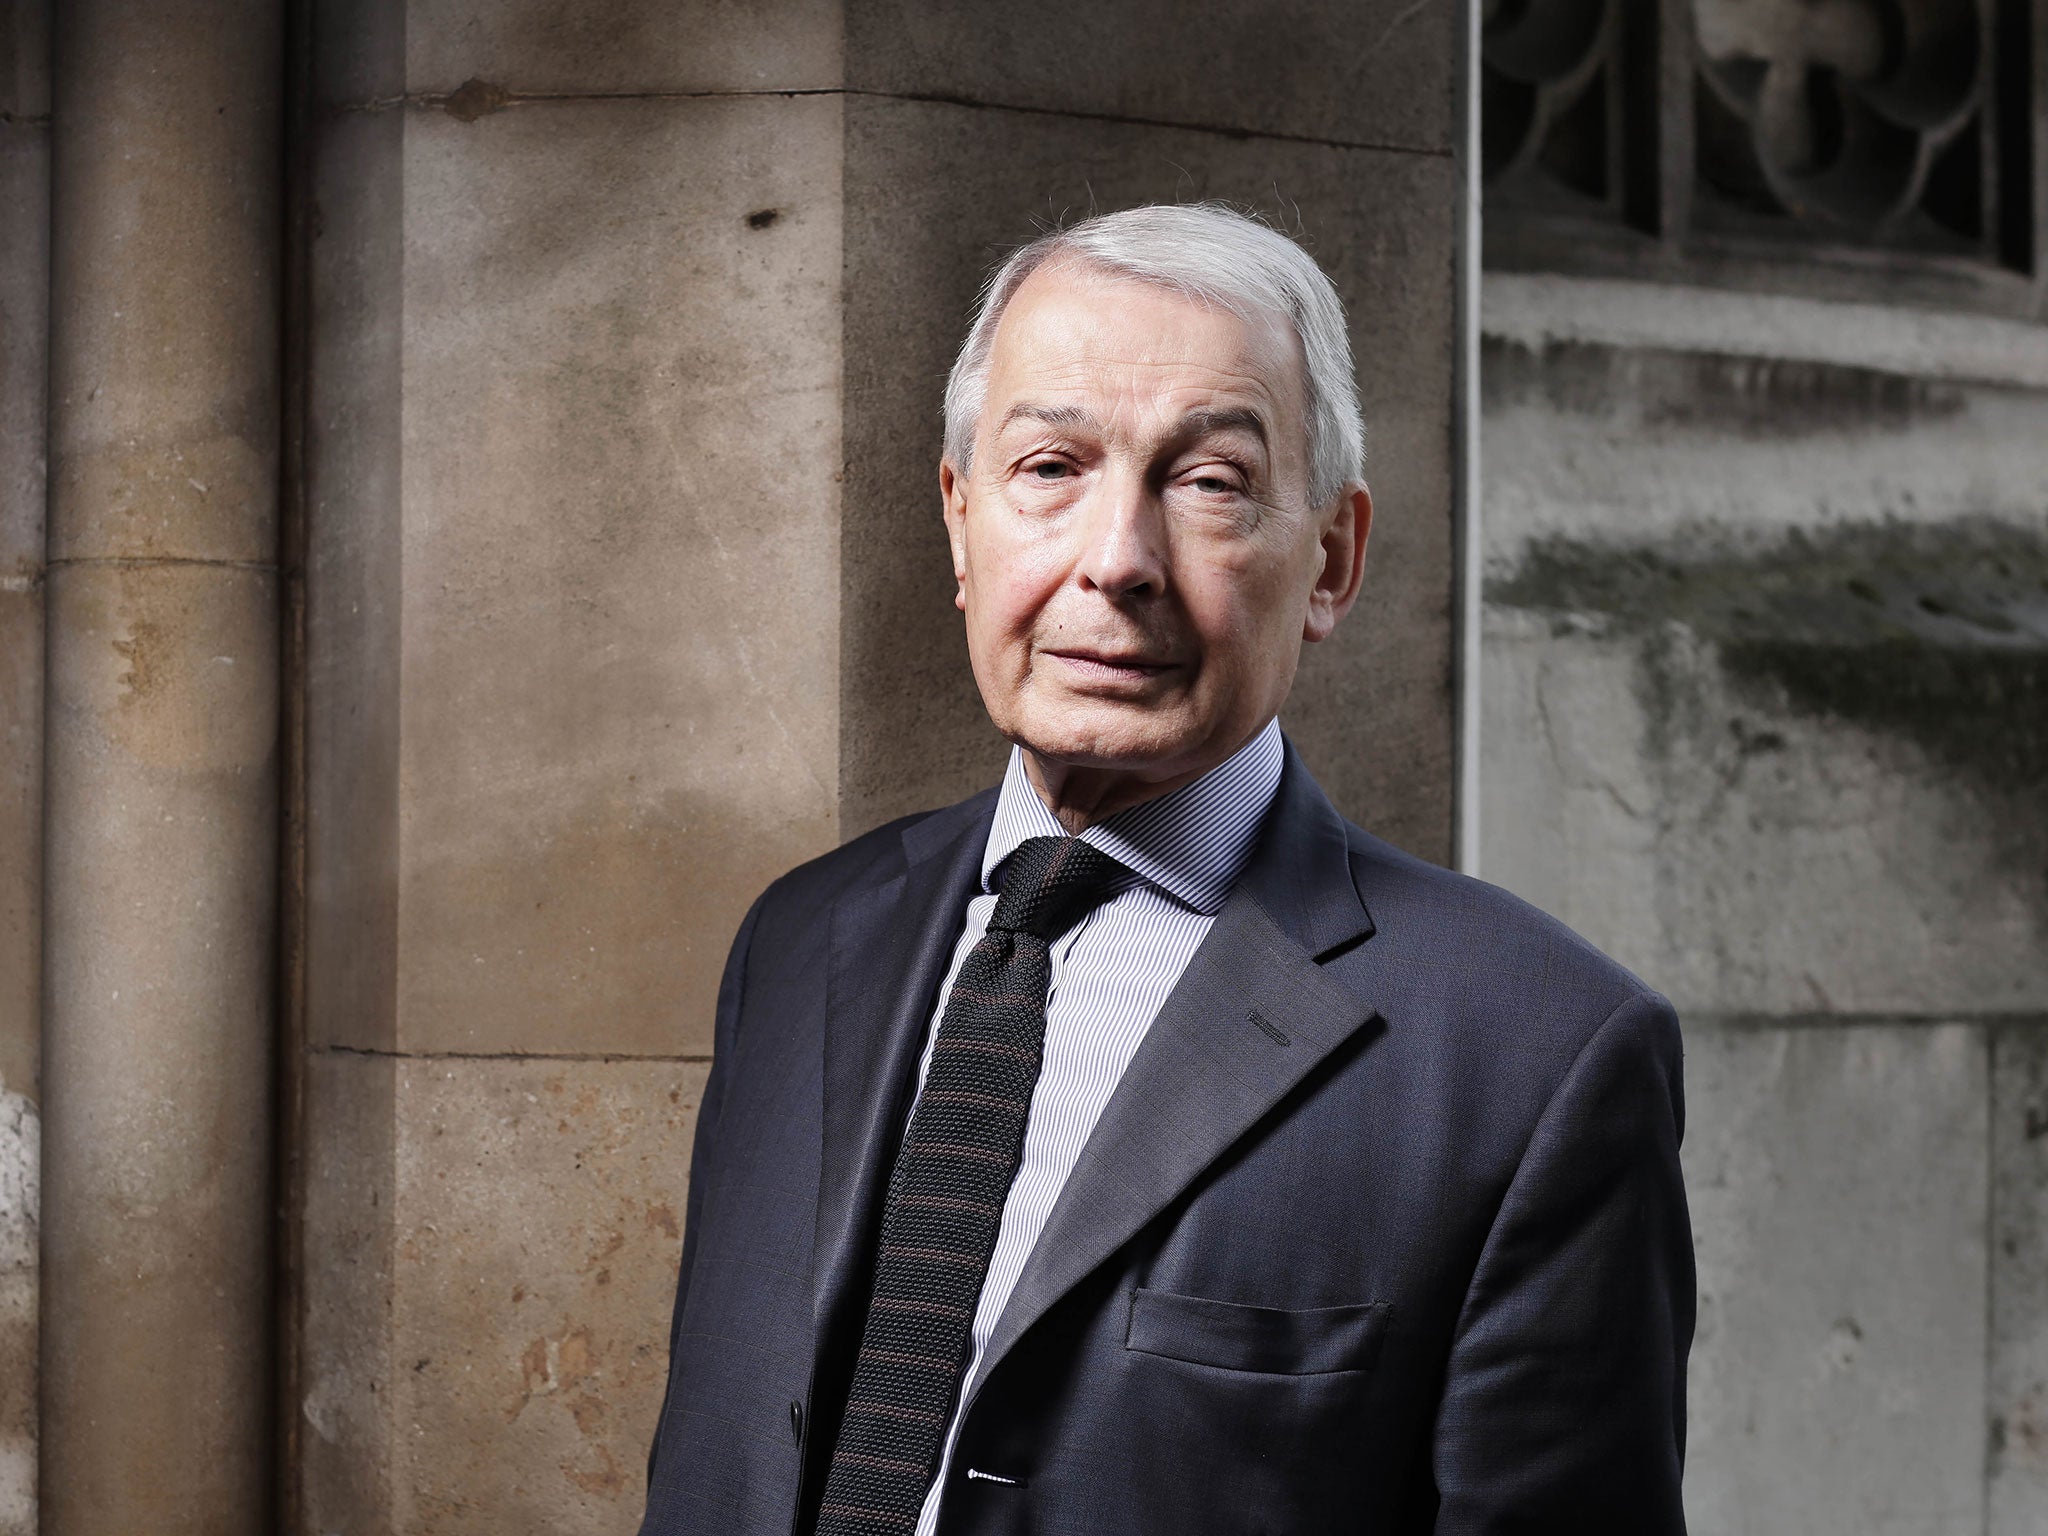 Frank Field, Labour chairman of the Work and Pensions Committee